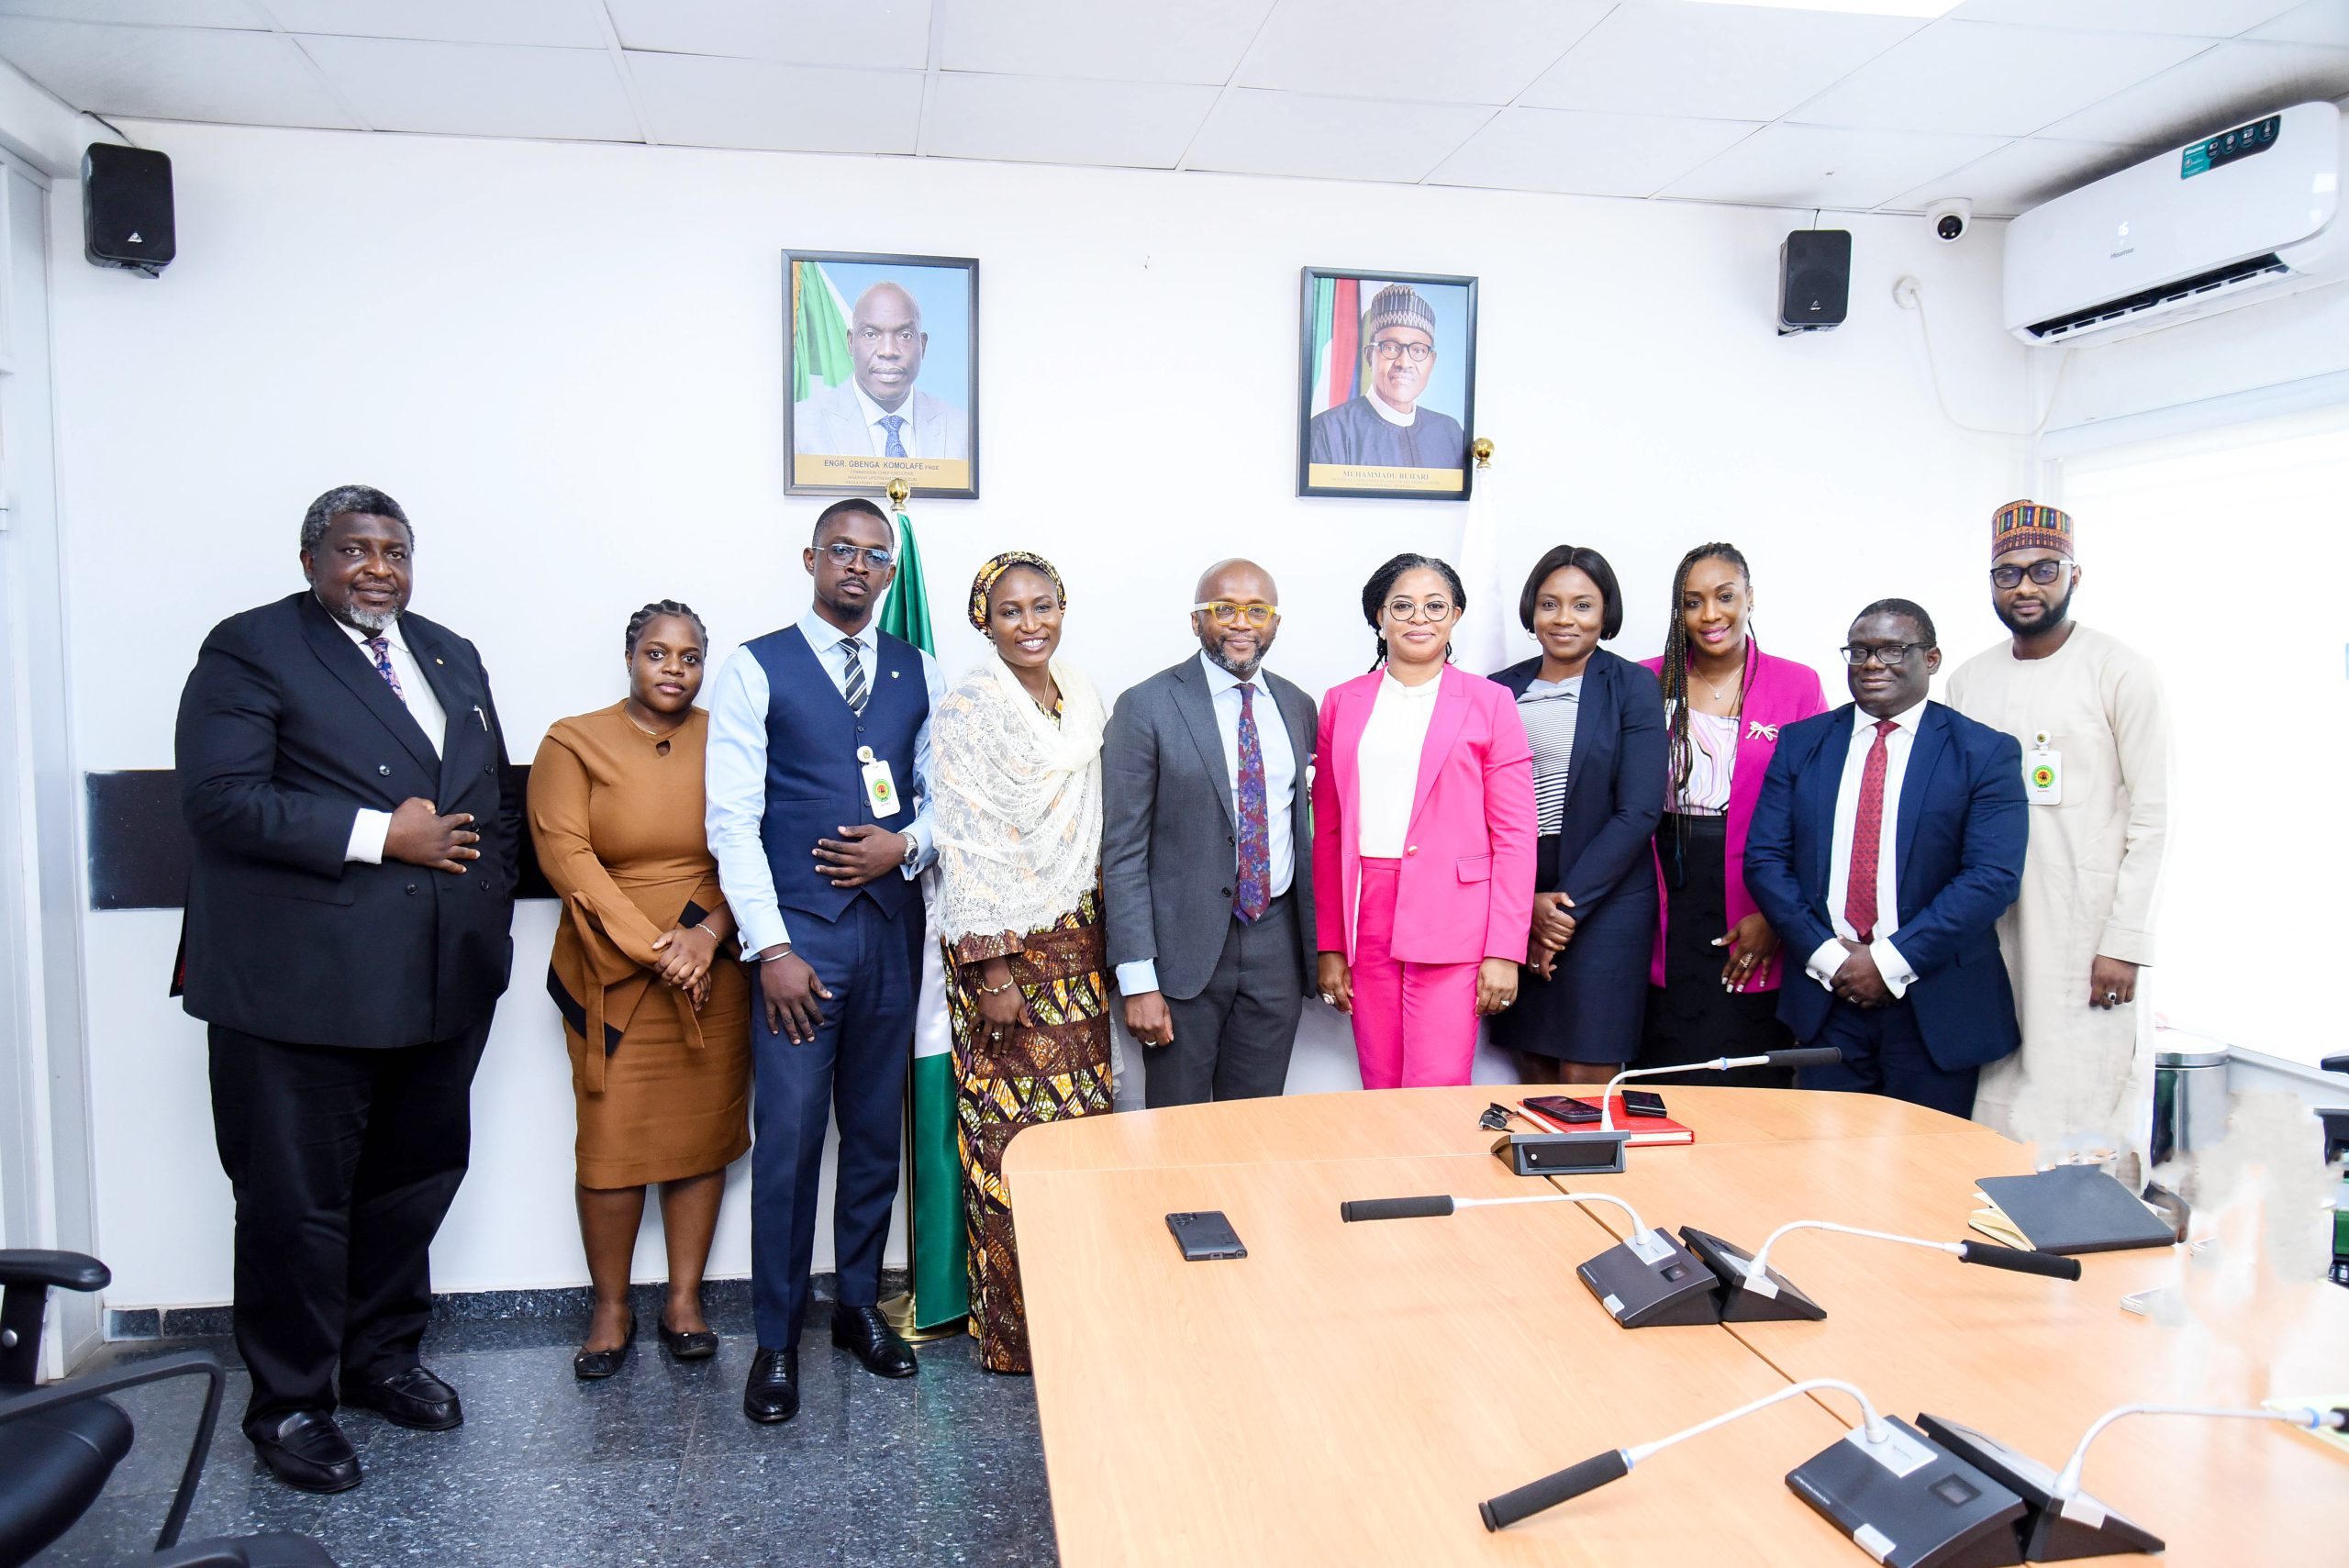 PHOTO NEWS: Nigerian Bar Association – Section on Business Law Courtesy Visit